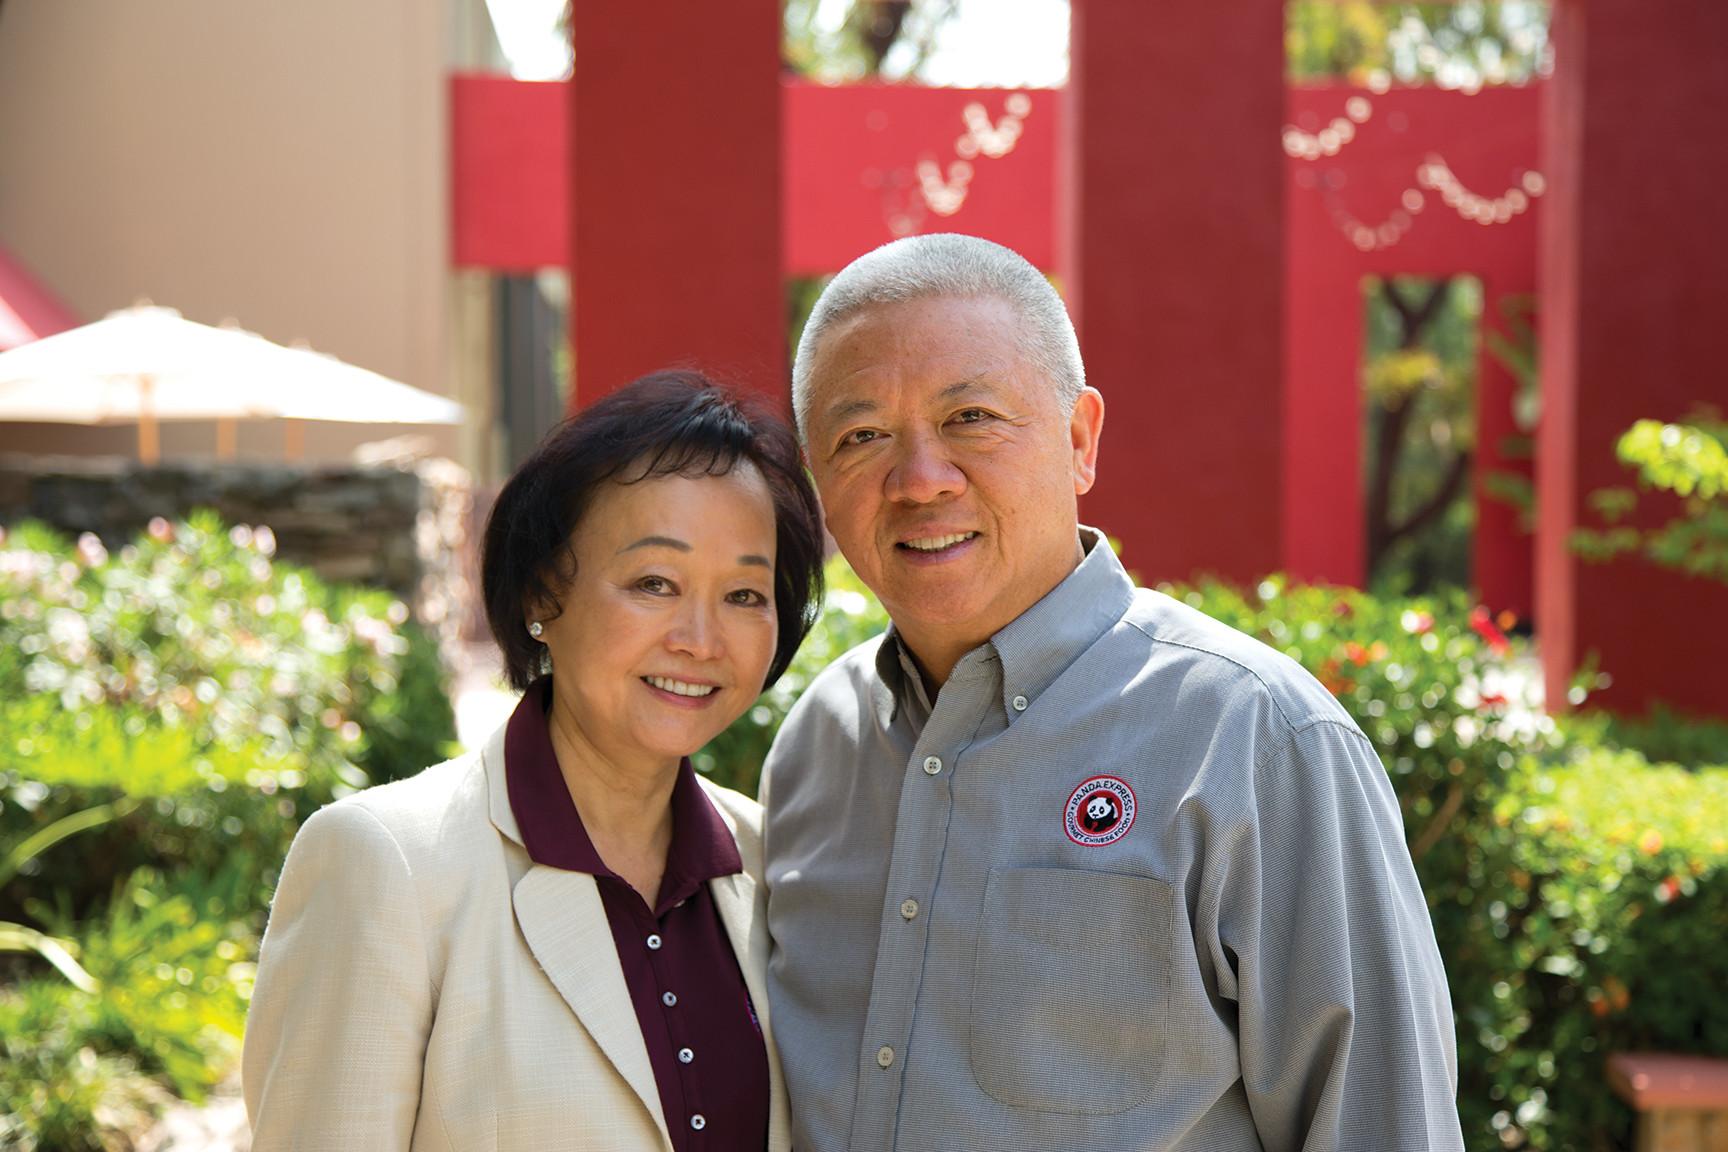 Panda Express cofounders and co-CEO Andrew and Peggy Cherng. Panda Express US